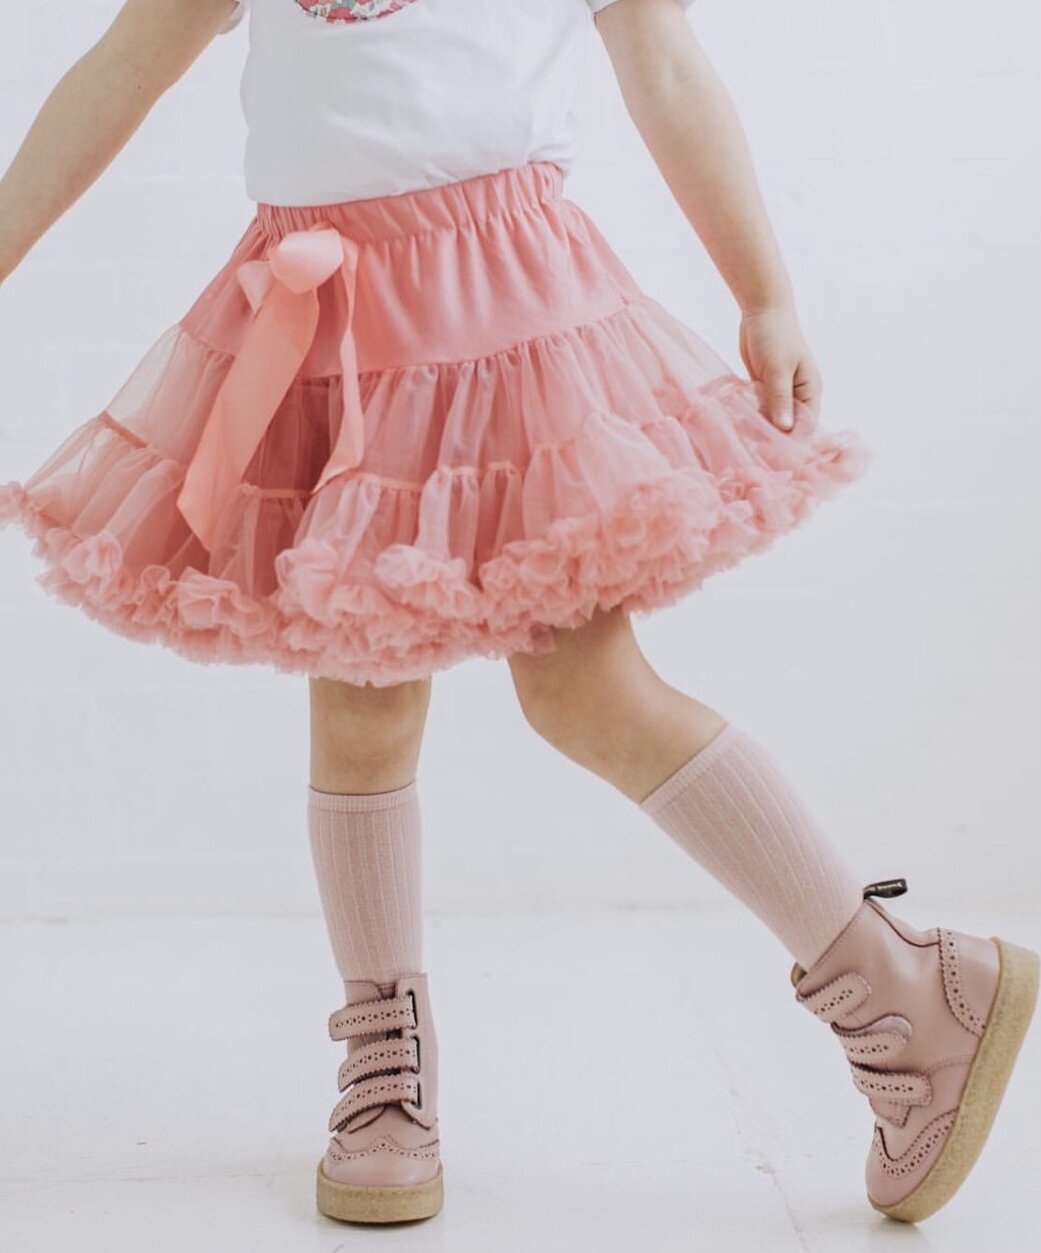  Bella says "The best skirts for twirling” Life is better in a tutu. 